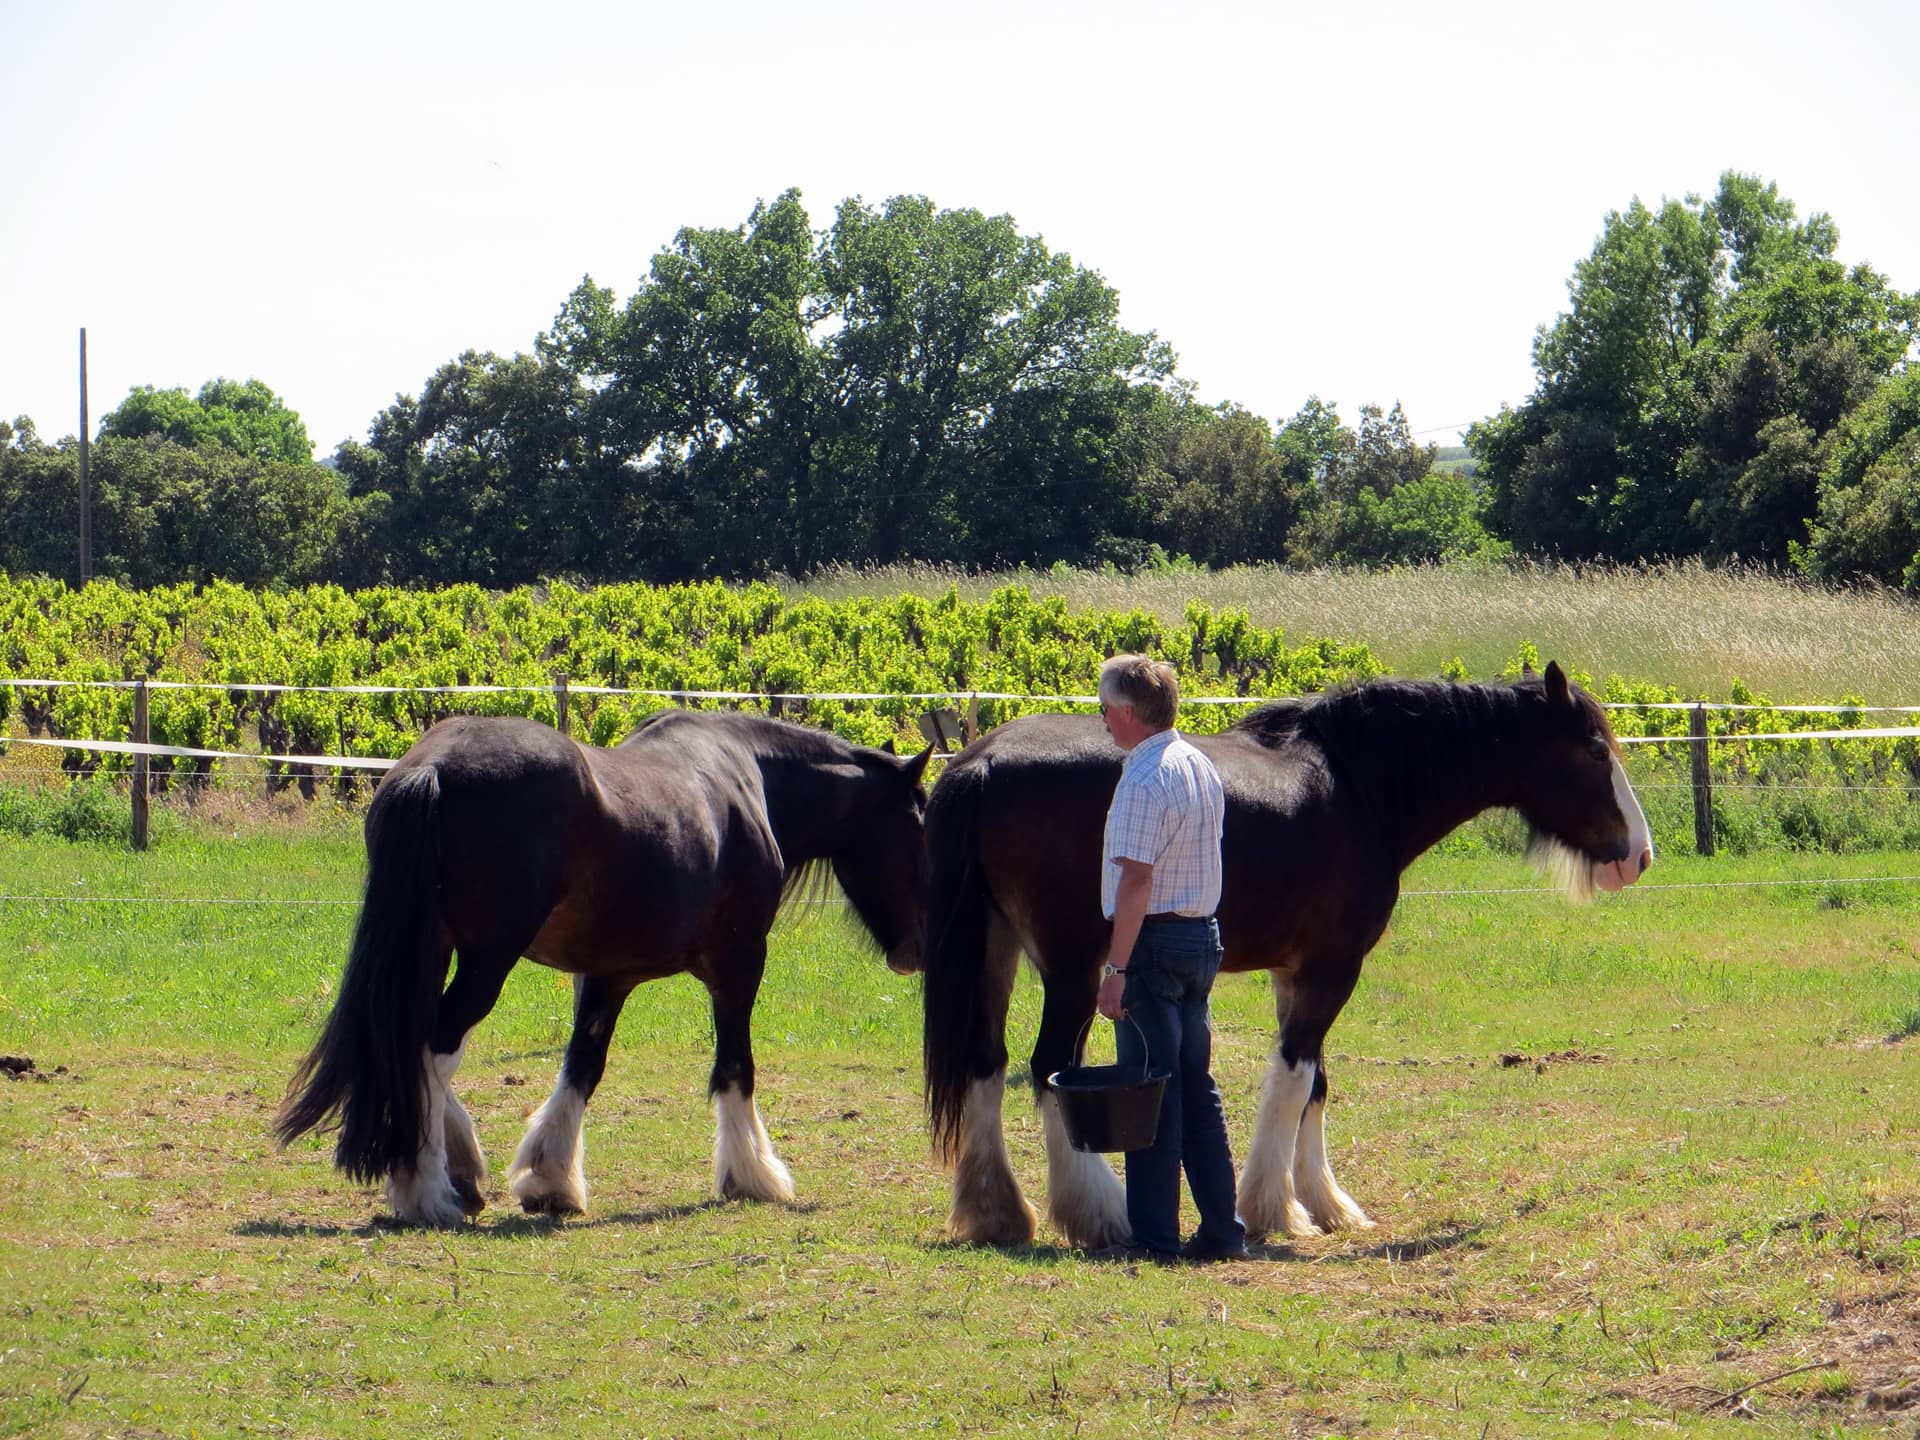 Two Shire horses